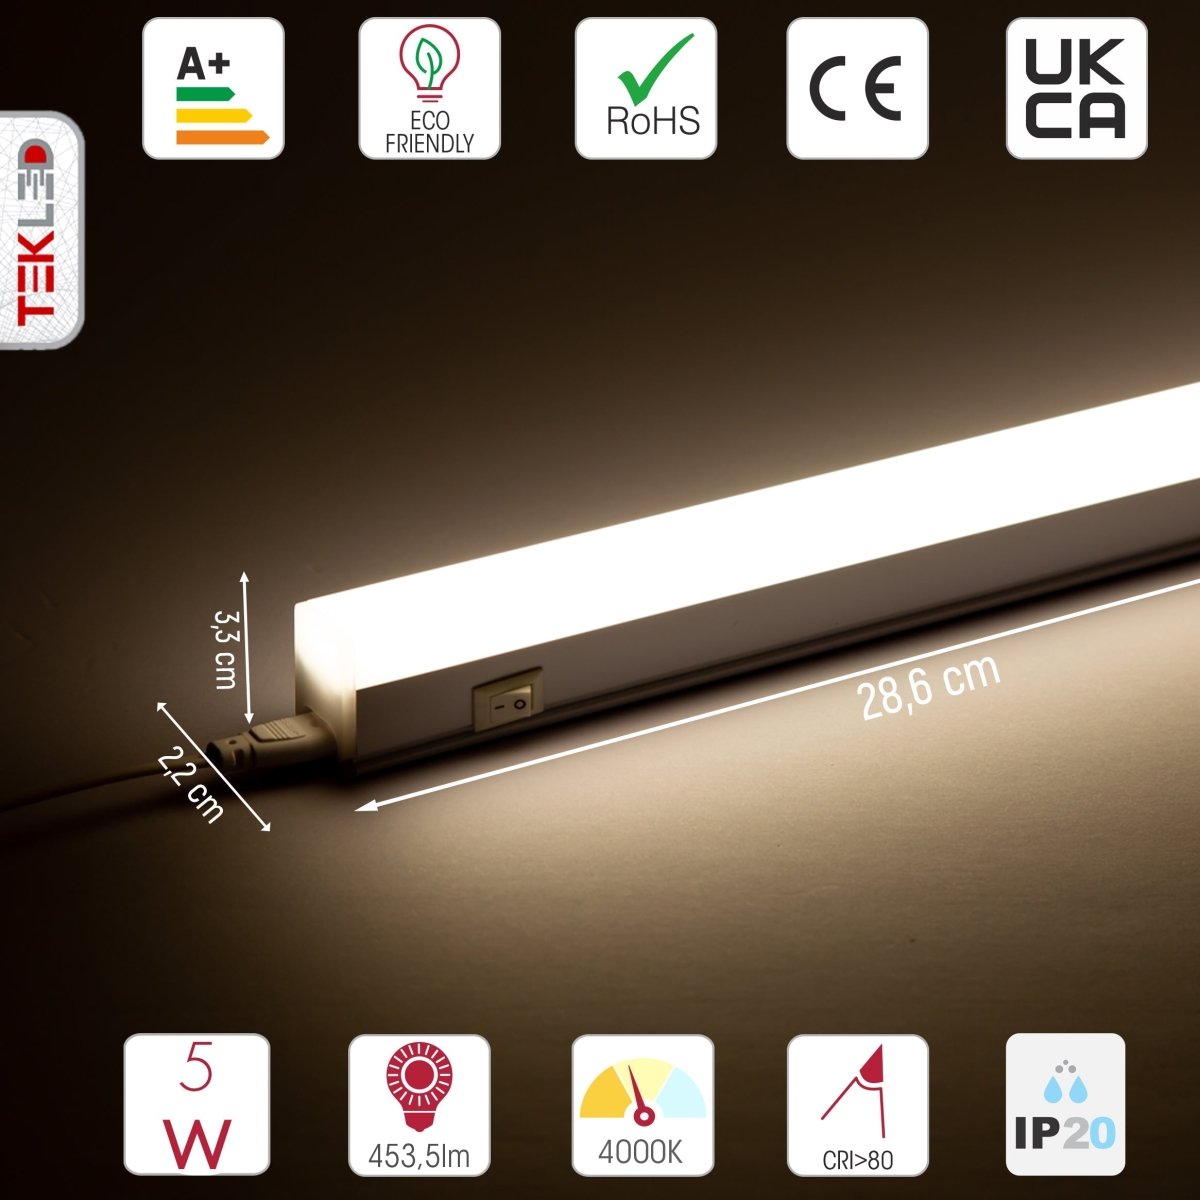 Technical specs and measurements for LED T5 Under Cabinet Link Light 5W 4000K Cool White IP20 with switch 286mm 1ft